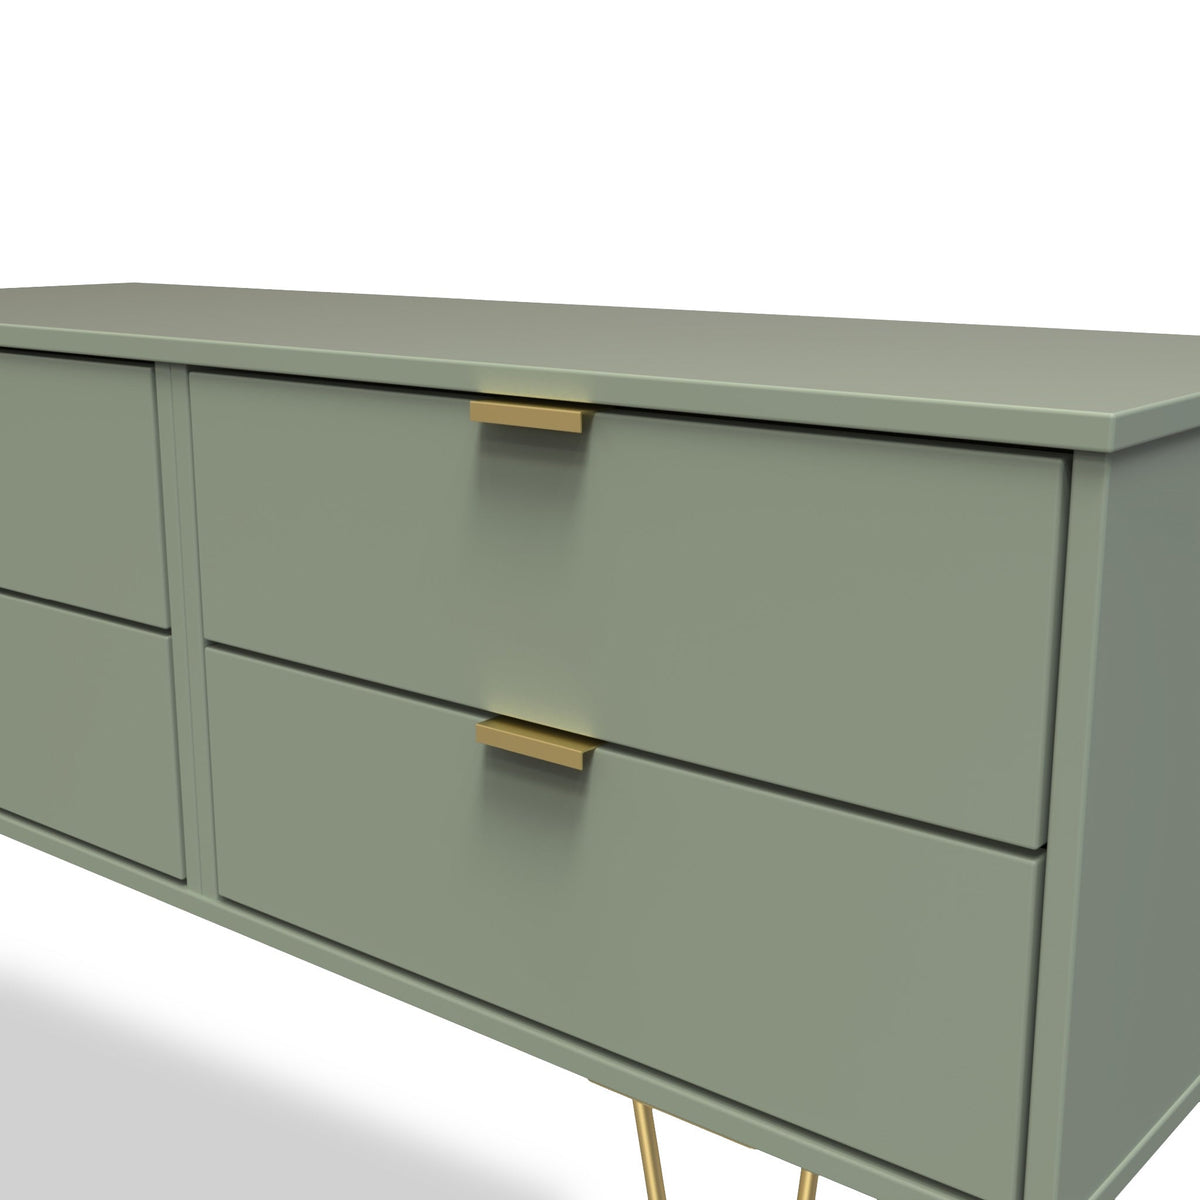 Moreno Olive Green Low 4 Drawer Chest with gold hairpin legs